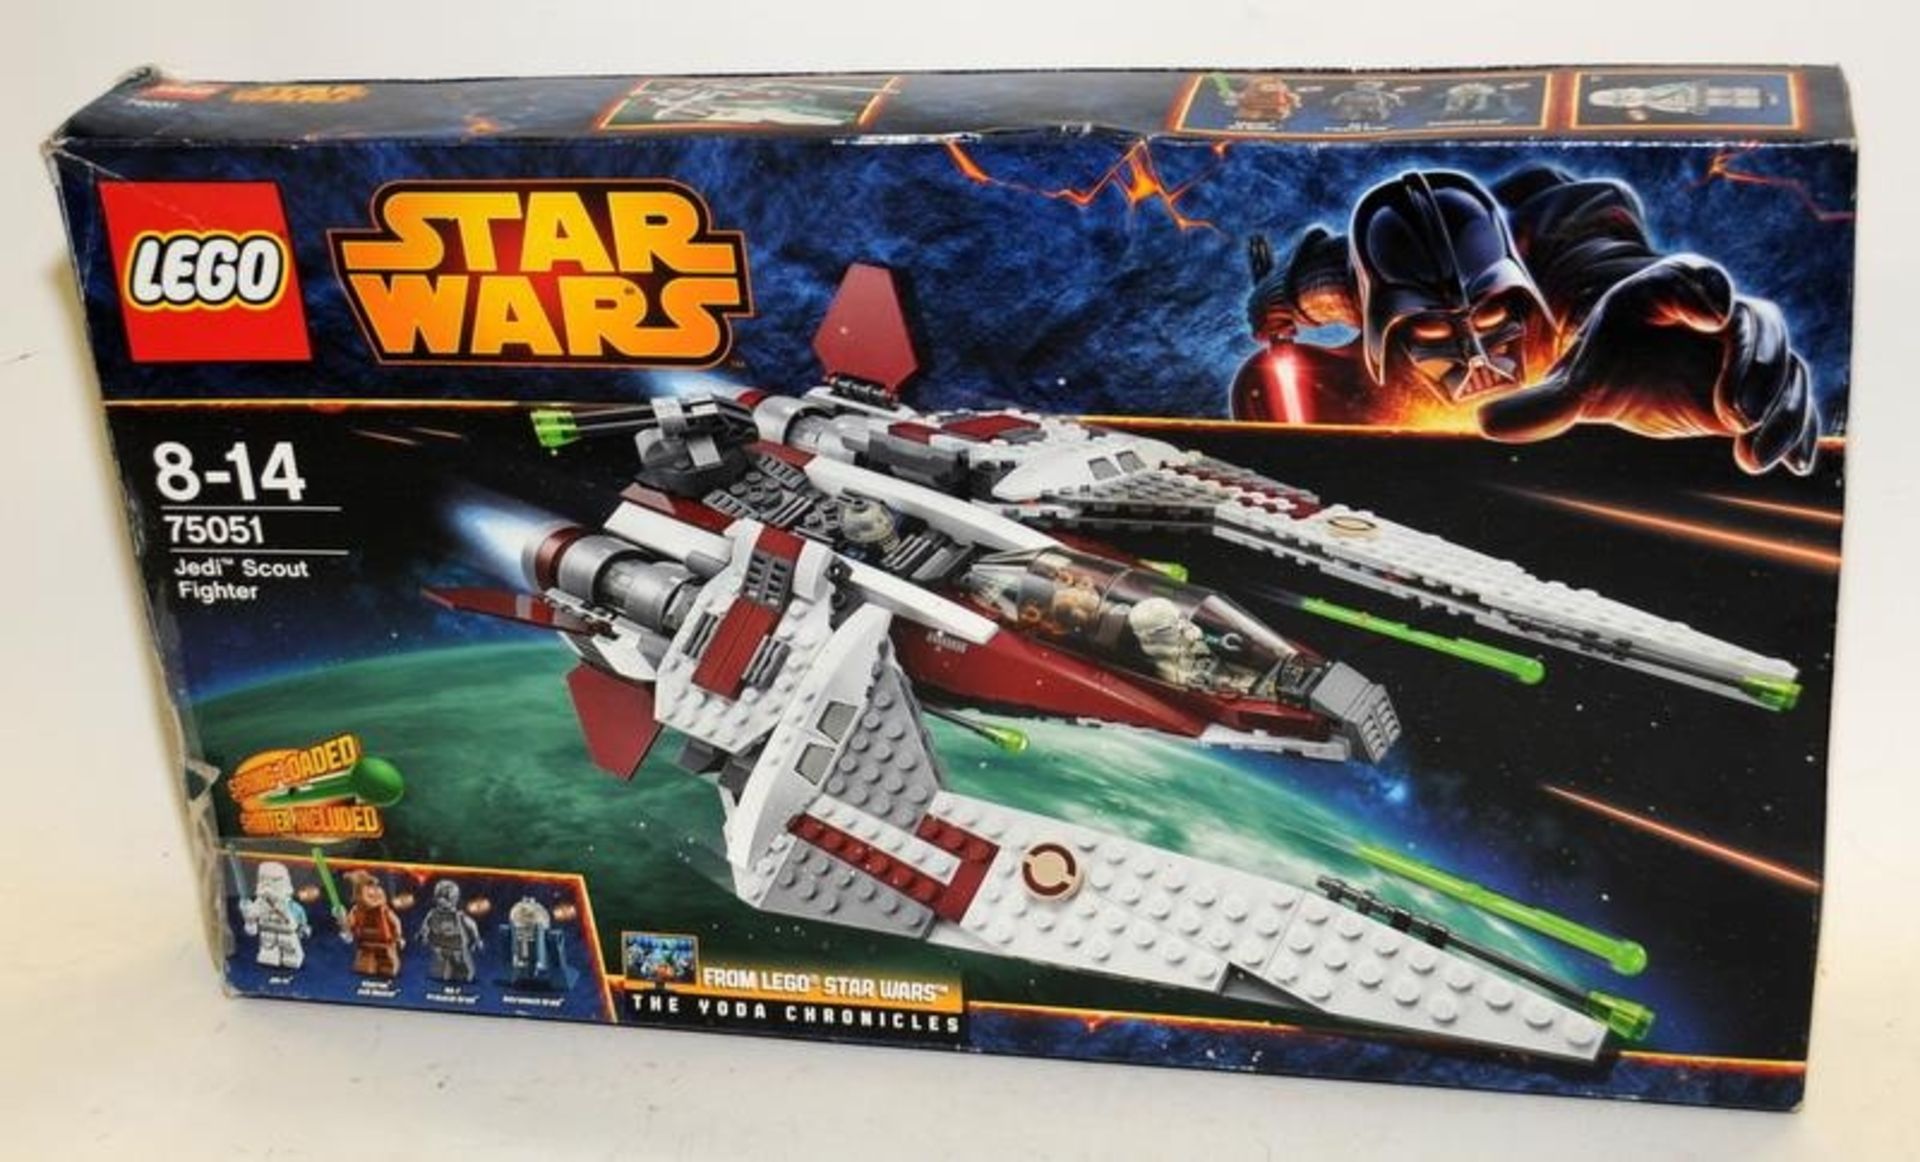 Star Wars Lego: Jedi Scout Fighter ref:75051. Boxed, model complete except for missing pieces 1 x - Image 3 of 4